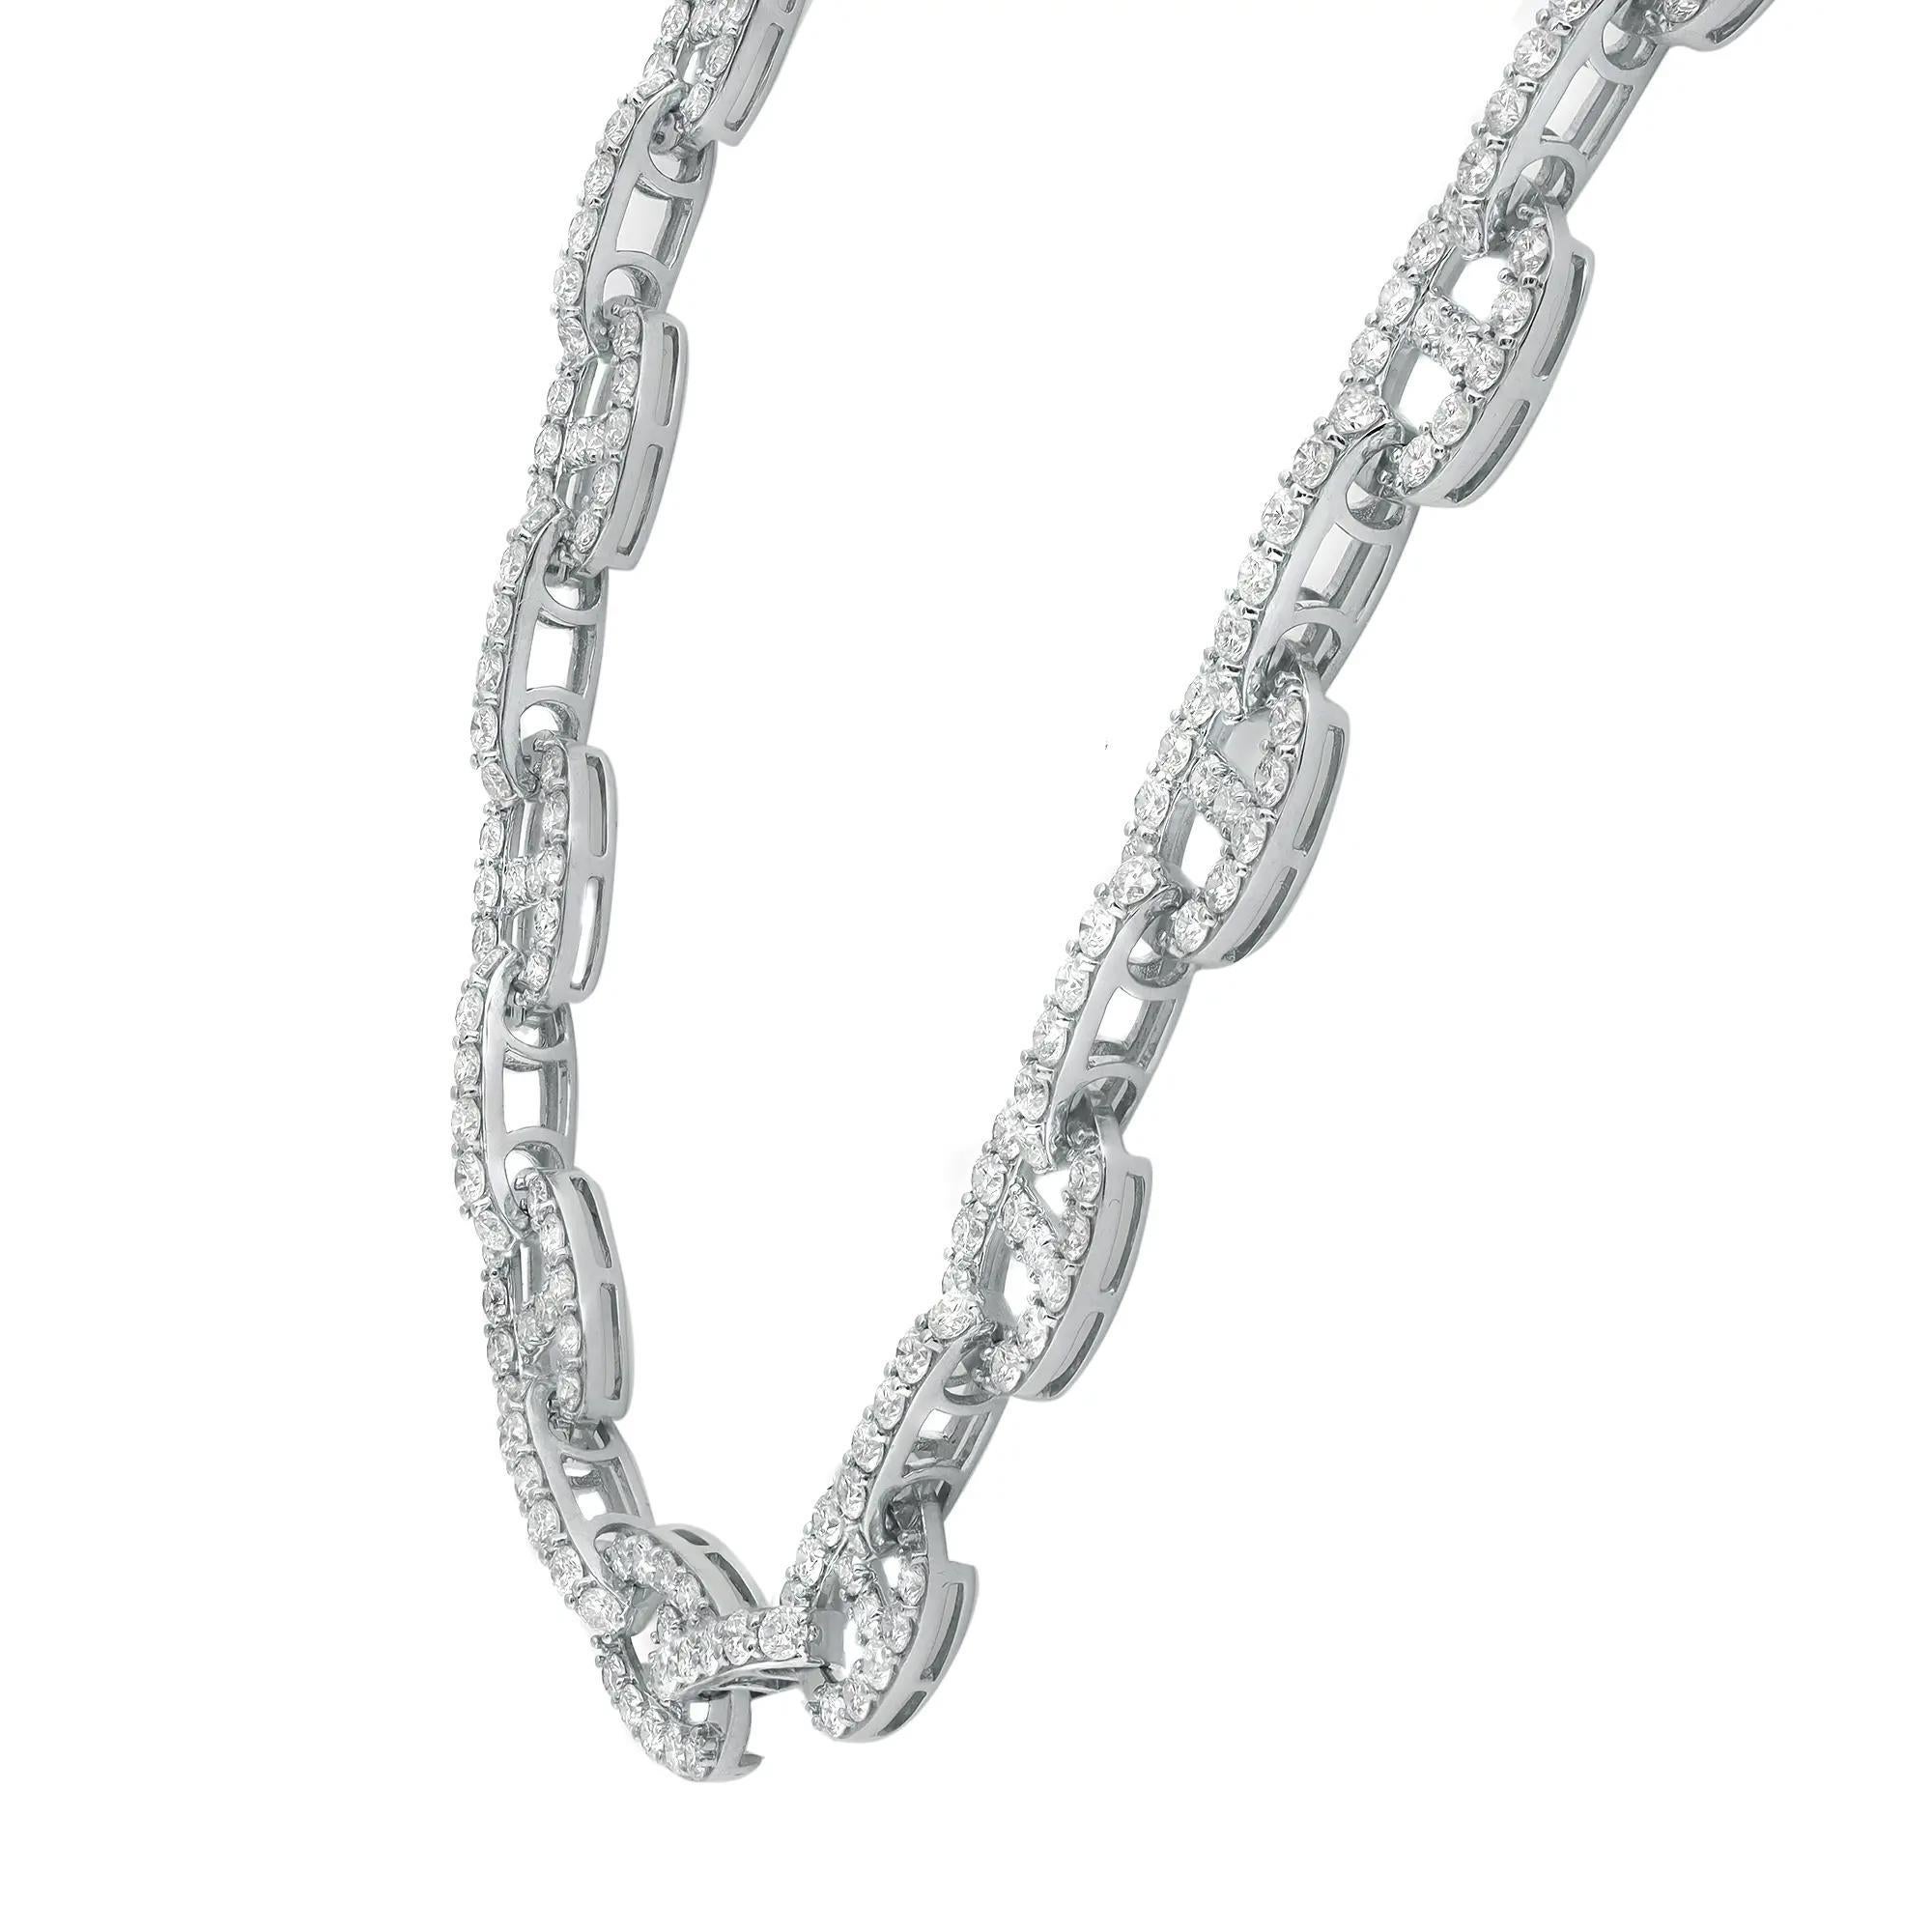 This gorgeous statement necklace features prong set round brilliant cut diamond studded links crafted in 18K white gold. Total diamond weight: 14.96 carats. Diamond quality: color G-H and clarity VS-SI. Necklace length: 17.5 inches. Oval link size: